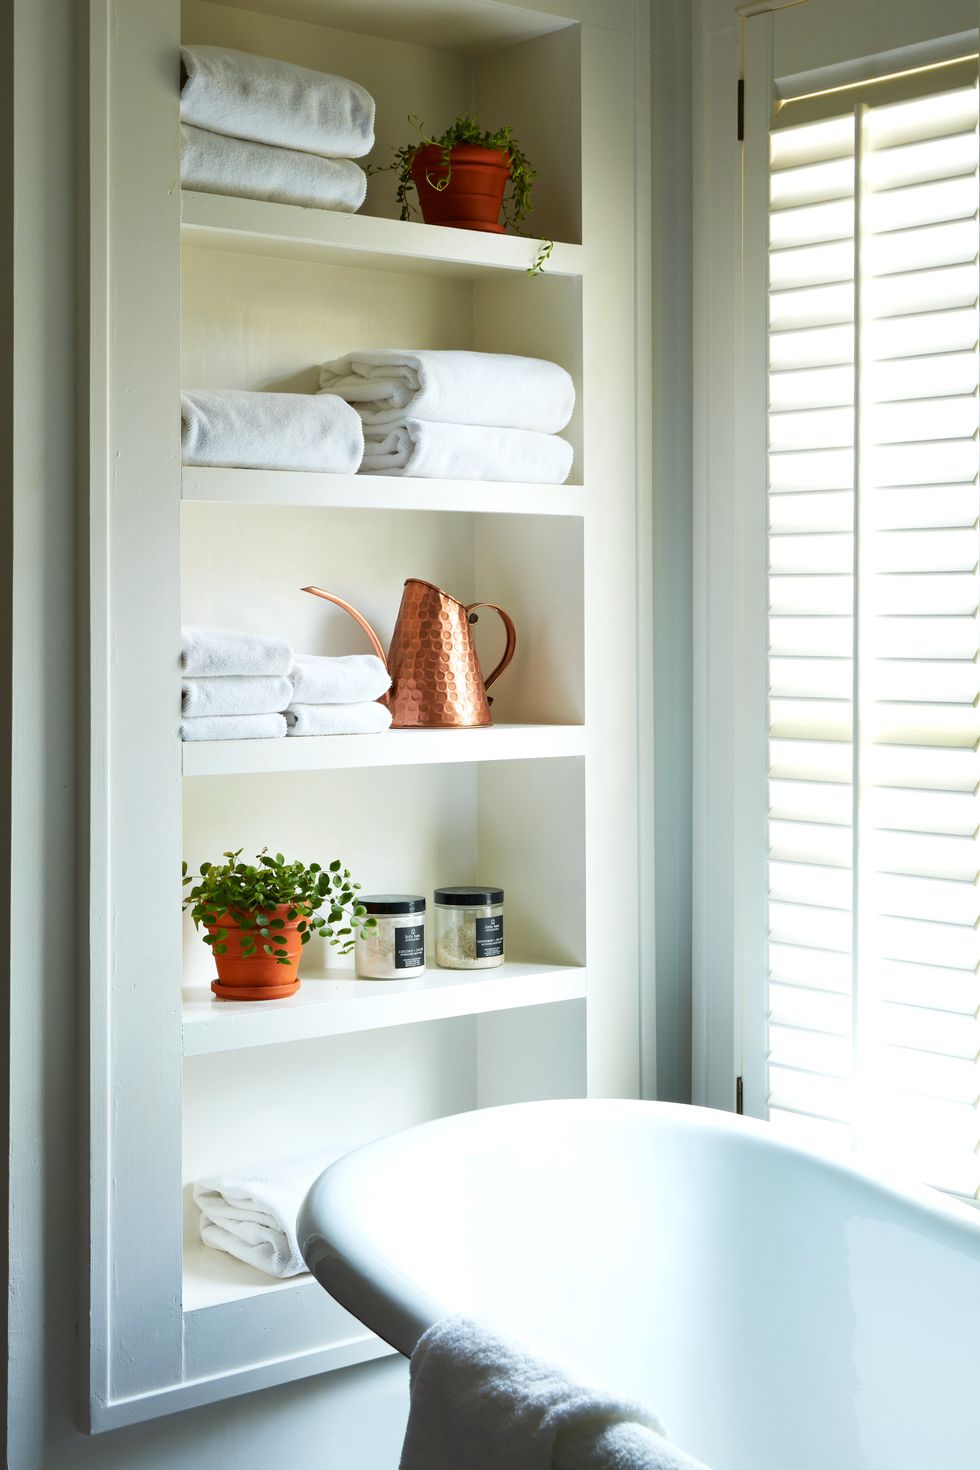 17 Great Guest Bathroom Ideas and Designer Tips